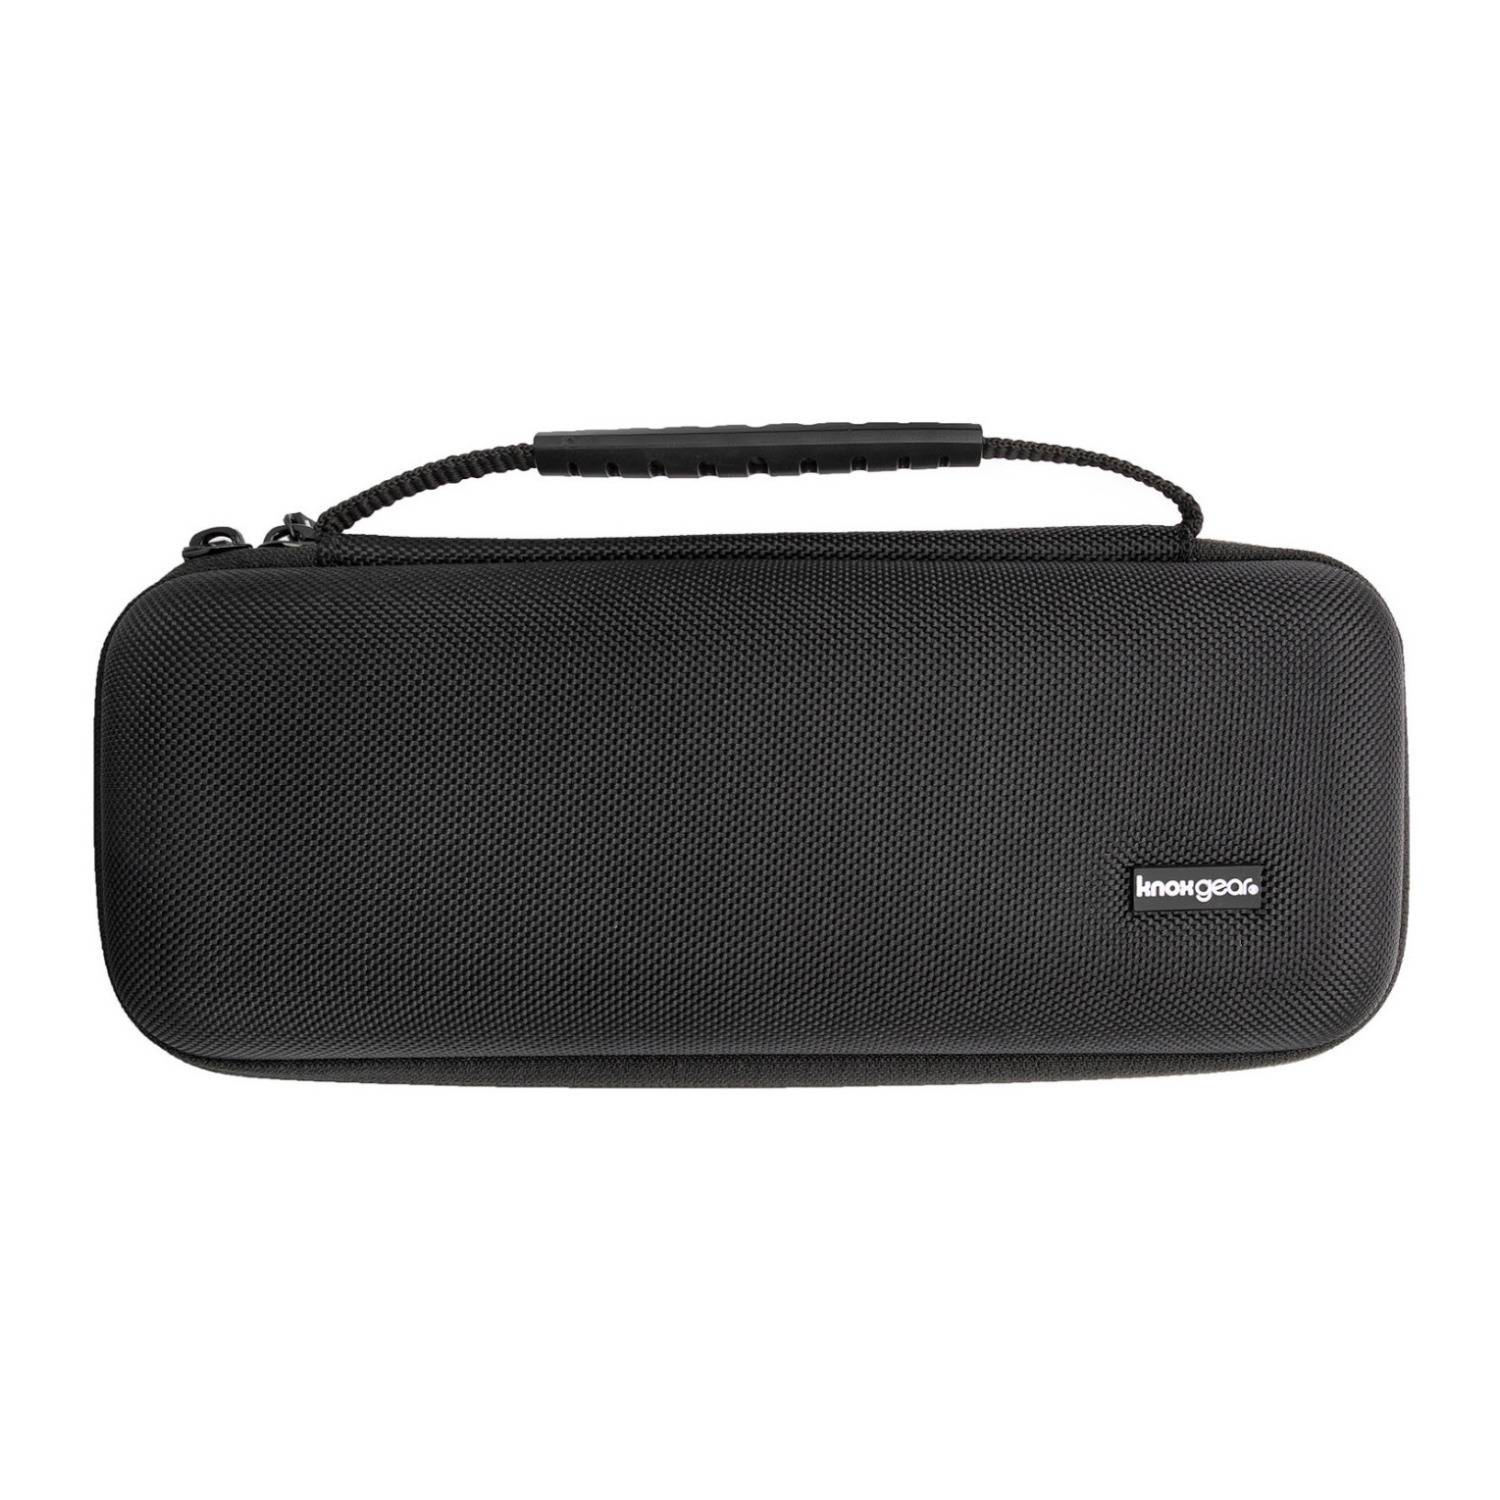 Knox Gear Hardshell Travel & Protective Case for Bluetooth Speakers